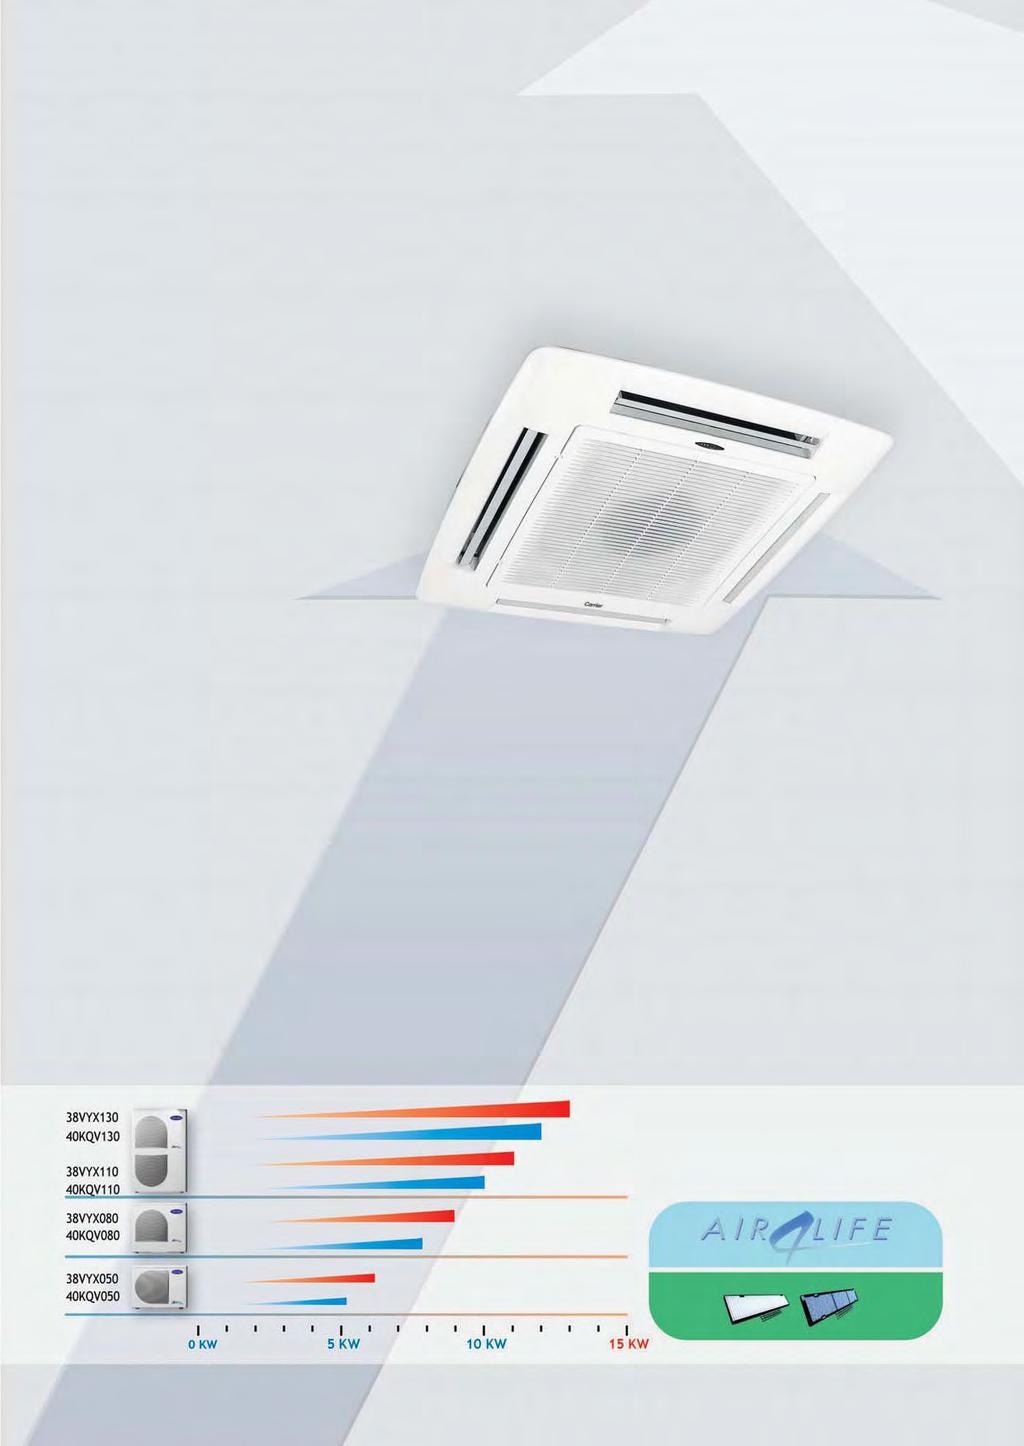 Cassette 40KQV CEILING CASSETTE THE CLASSIC CHOICE Ideal for any building with a false ceiling The unit has a fresh air inlet to ensure constant air renewal Motorised louvres with a choice of six